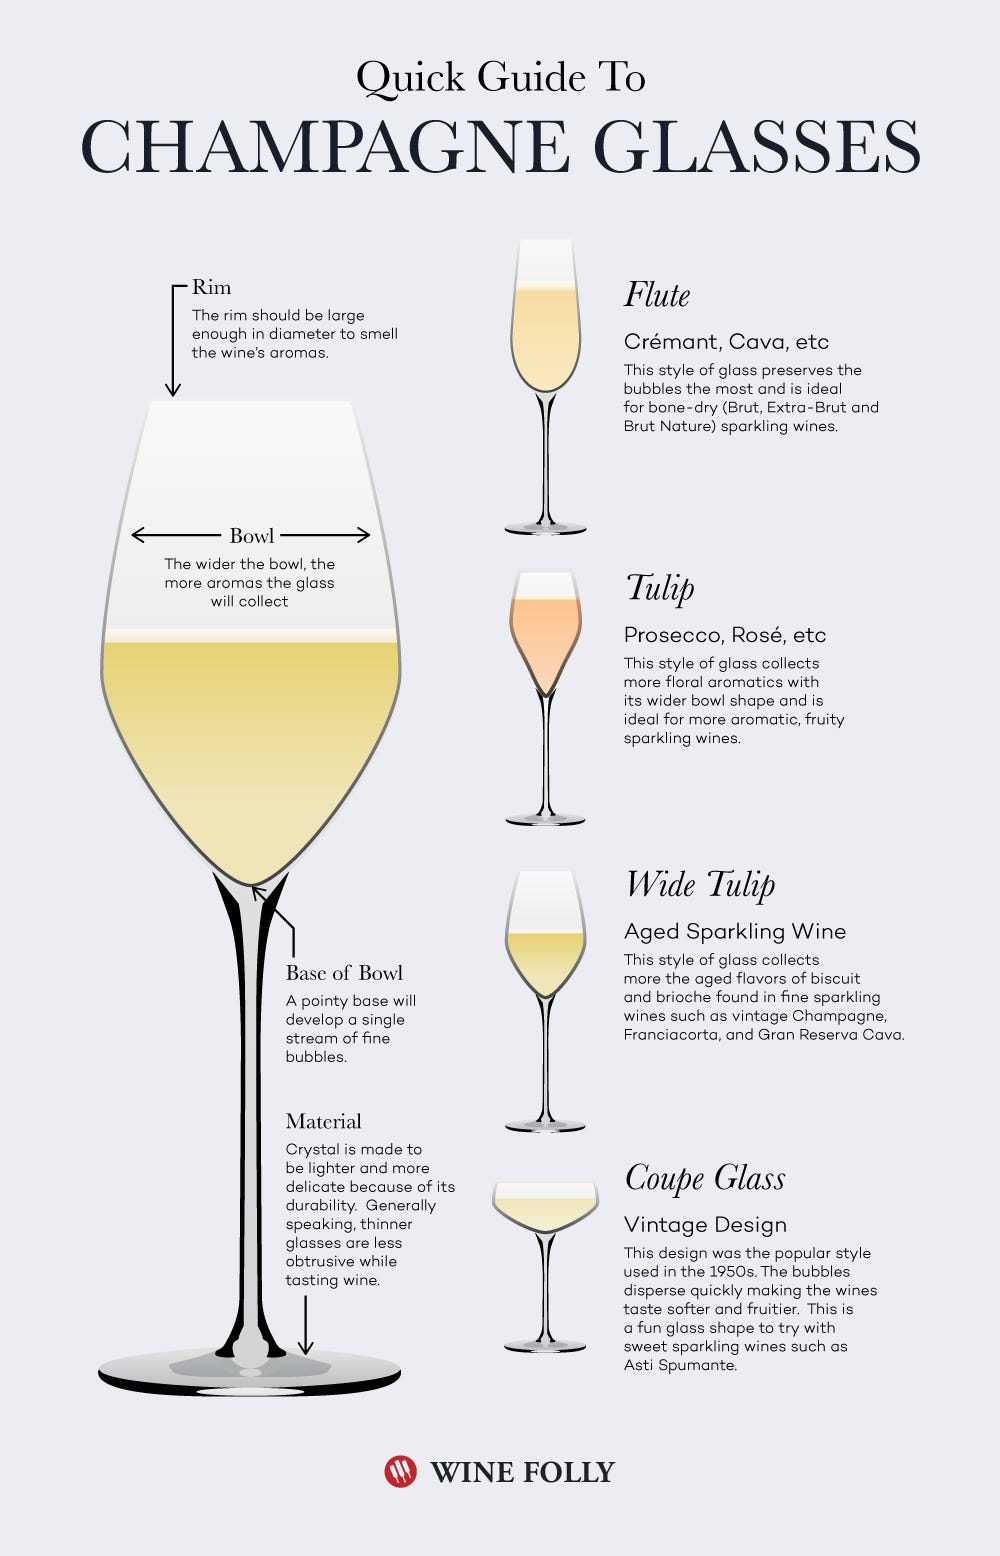 Champagne Glasses vs Flutes infographic by Wine Folly